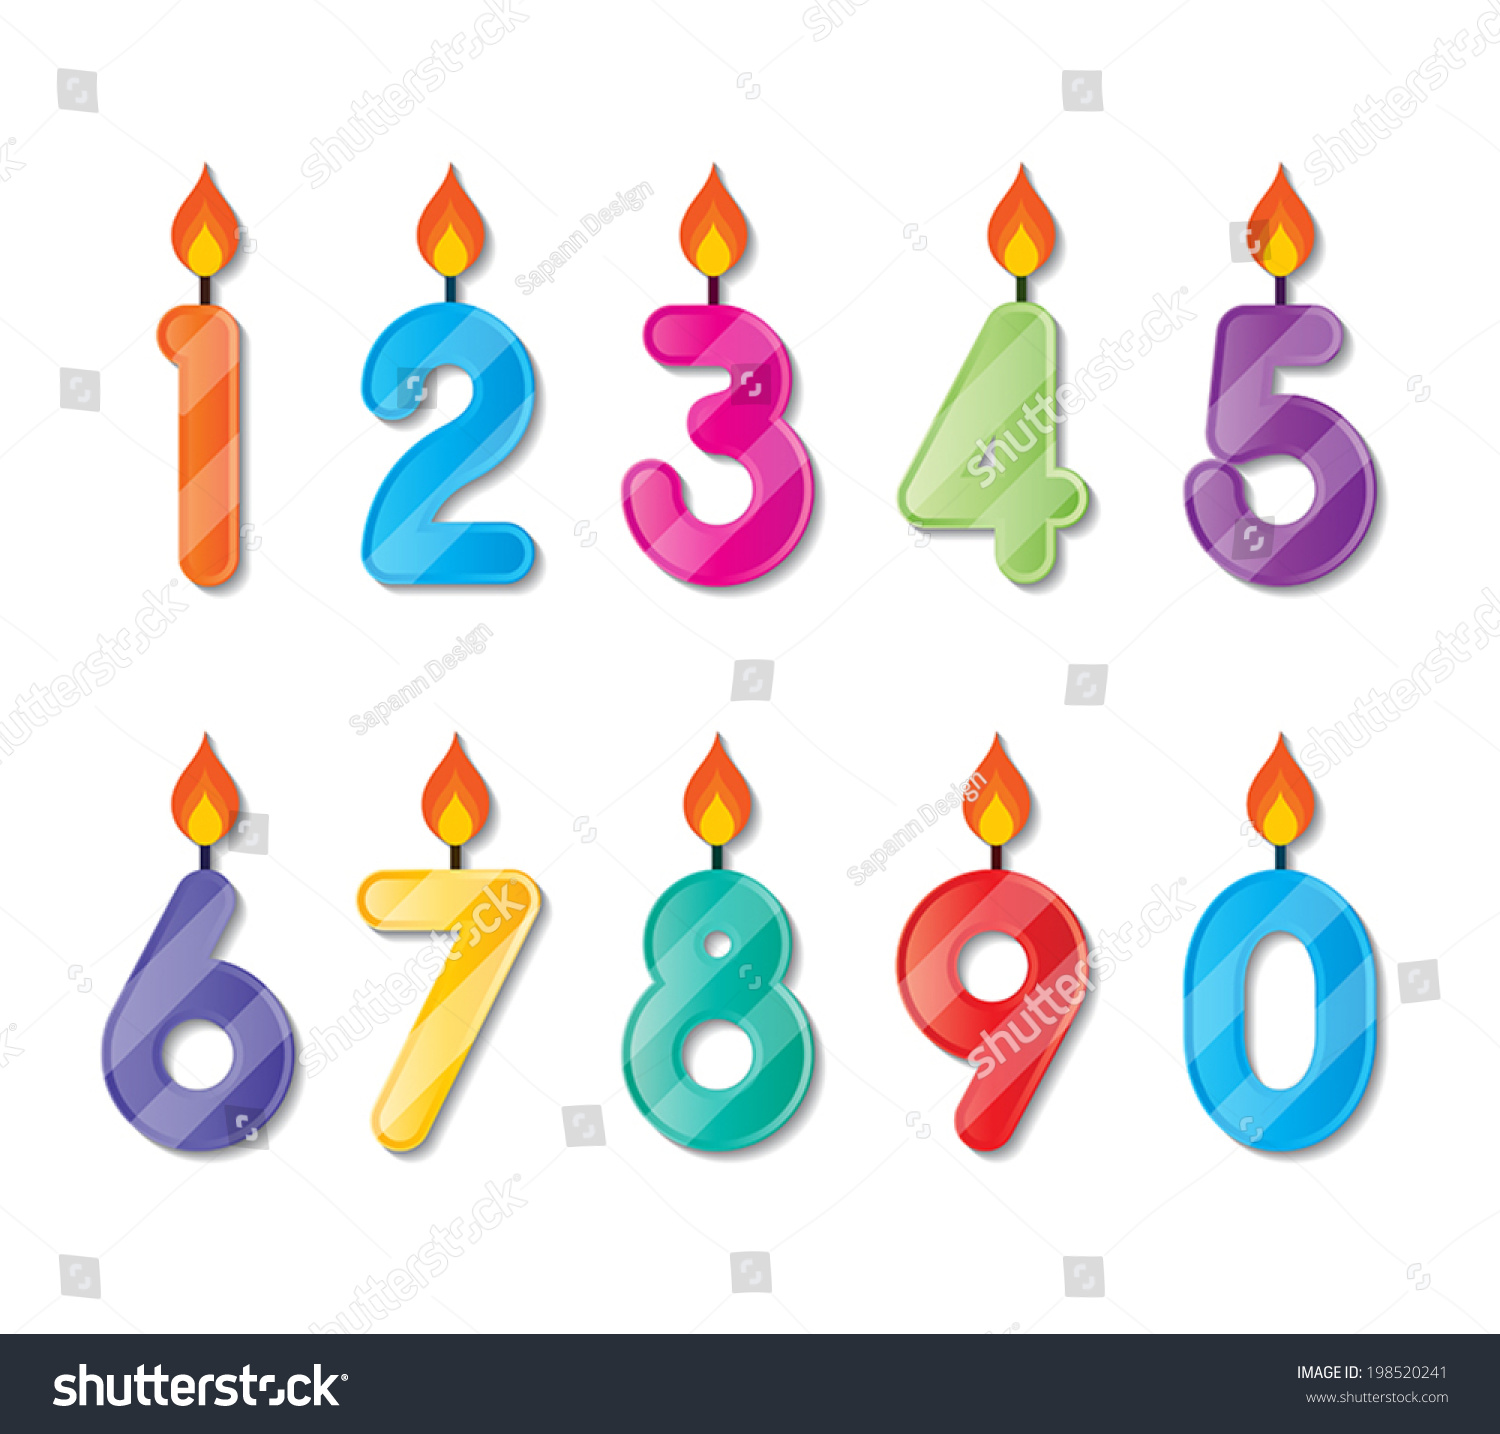 SVG of set of colorful happy birthday alphabets candles. vector. svg